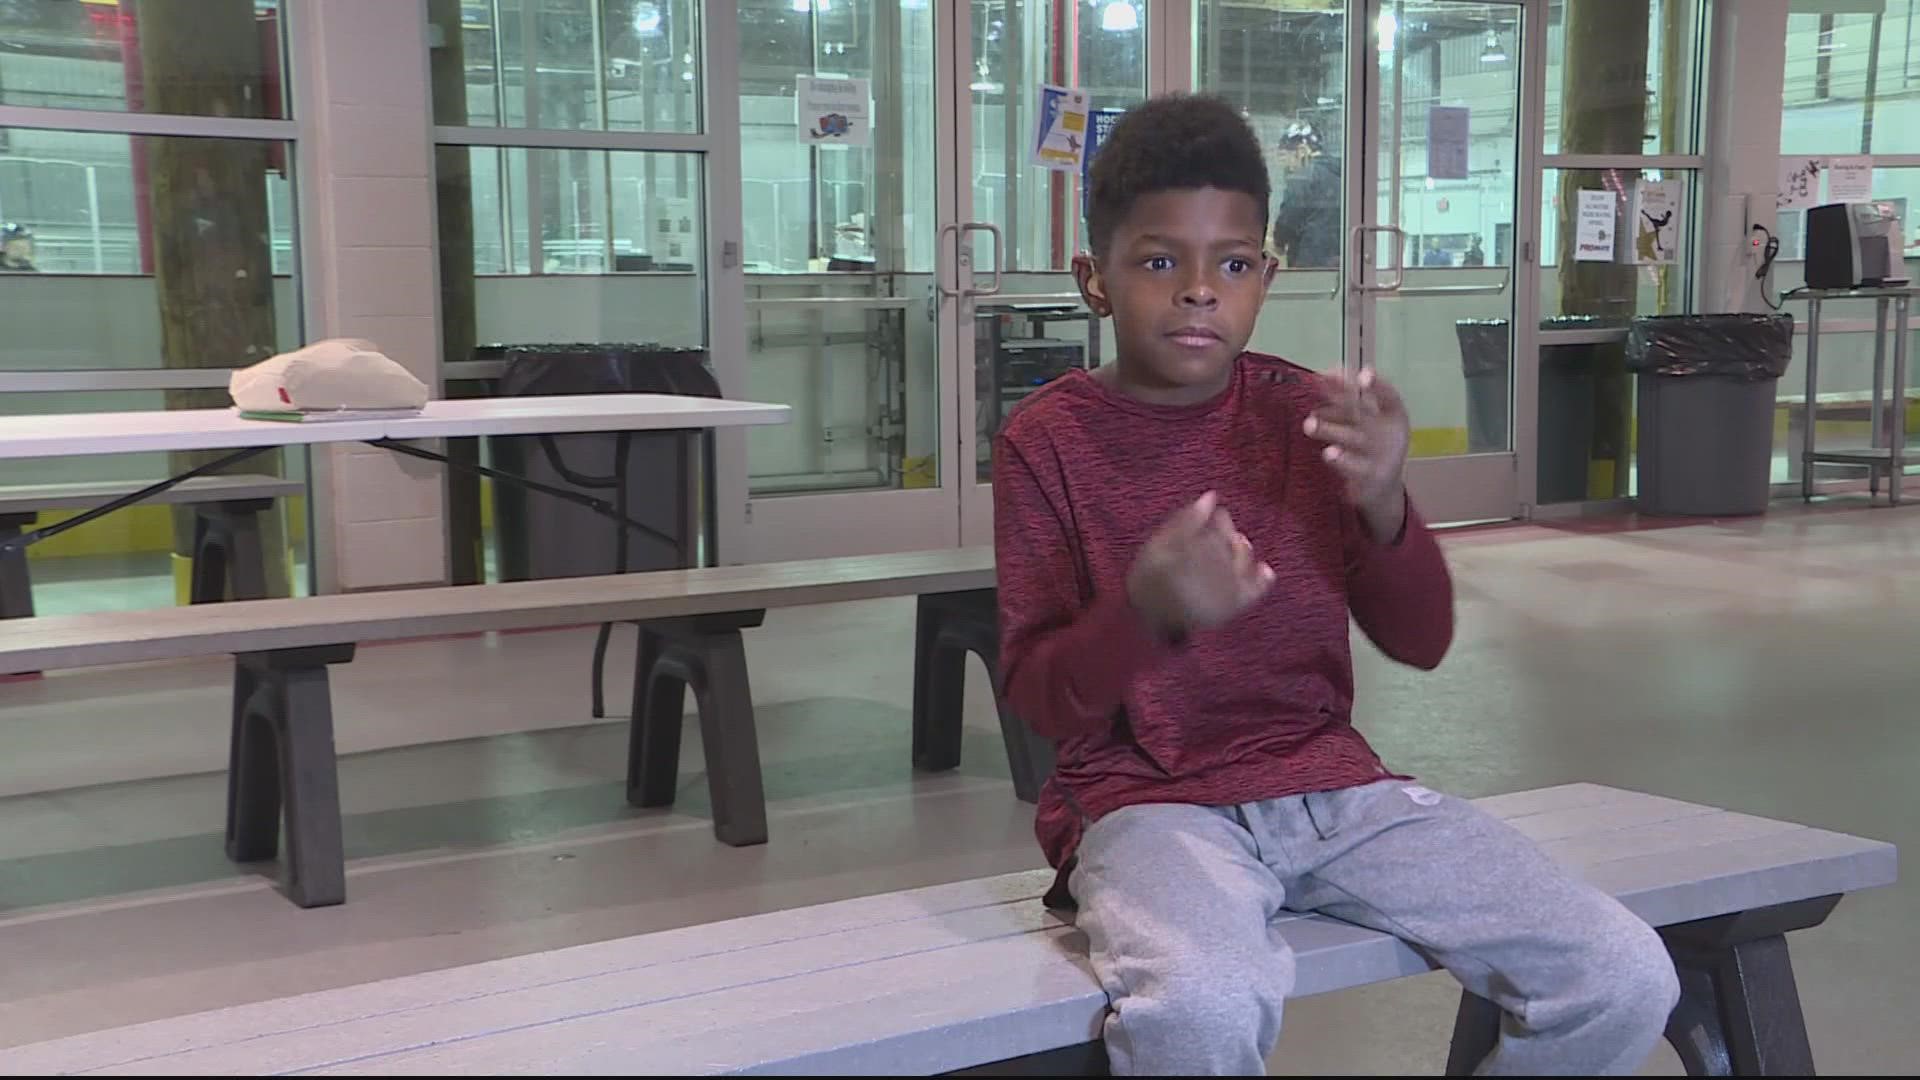 A 9-year-old hockey player first gained the spotlight in Bowie as the team's only Black, Deaf hockey player. Now, that spotlight has followed him to Hollywood.